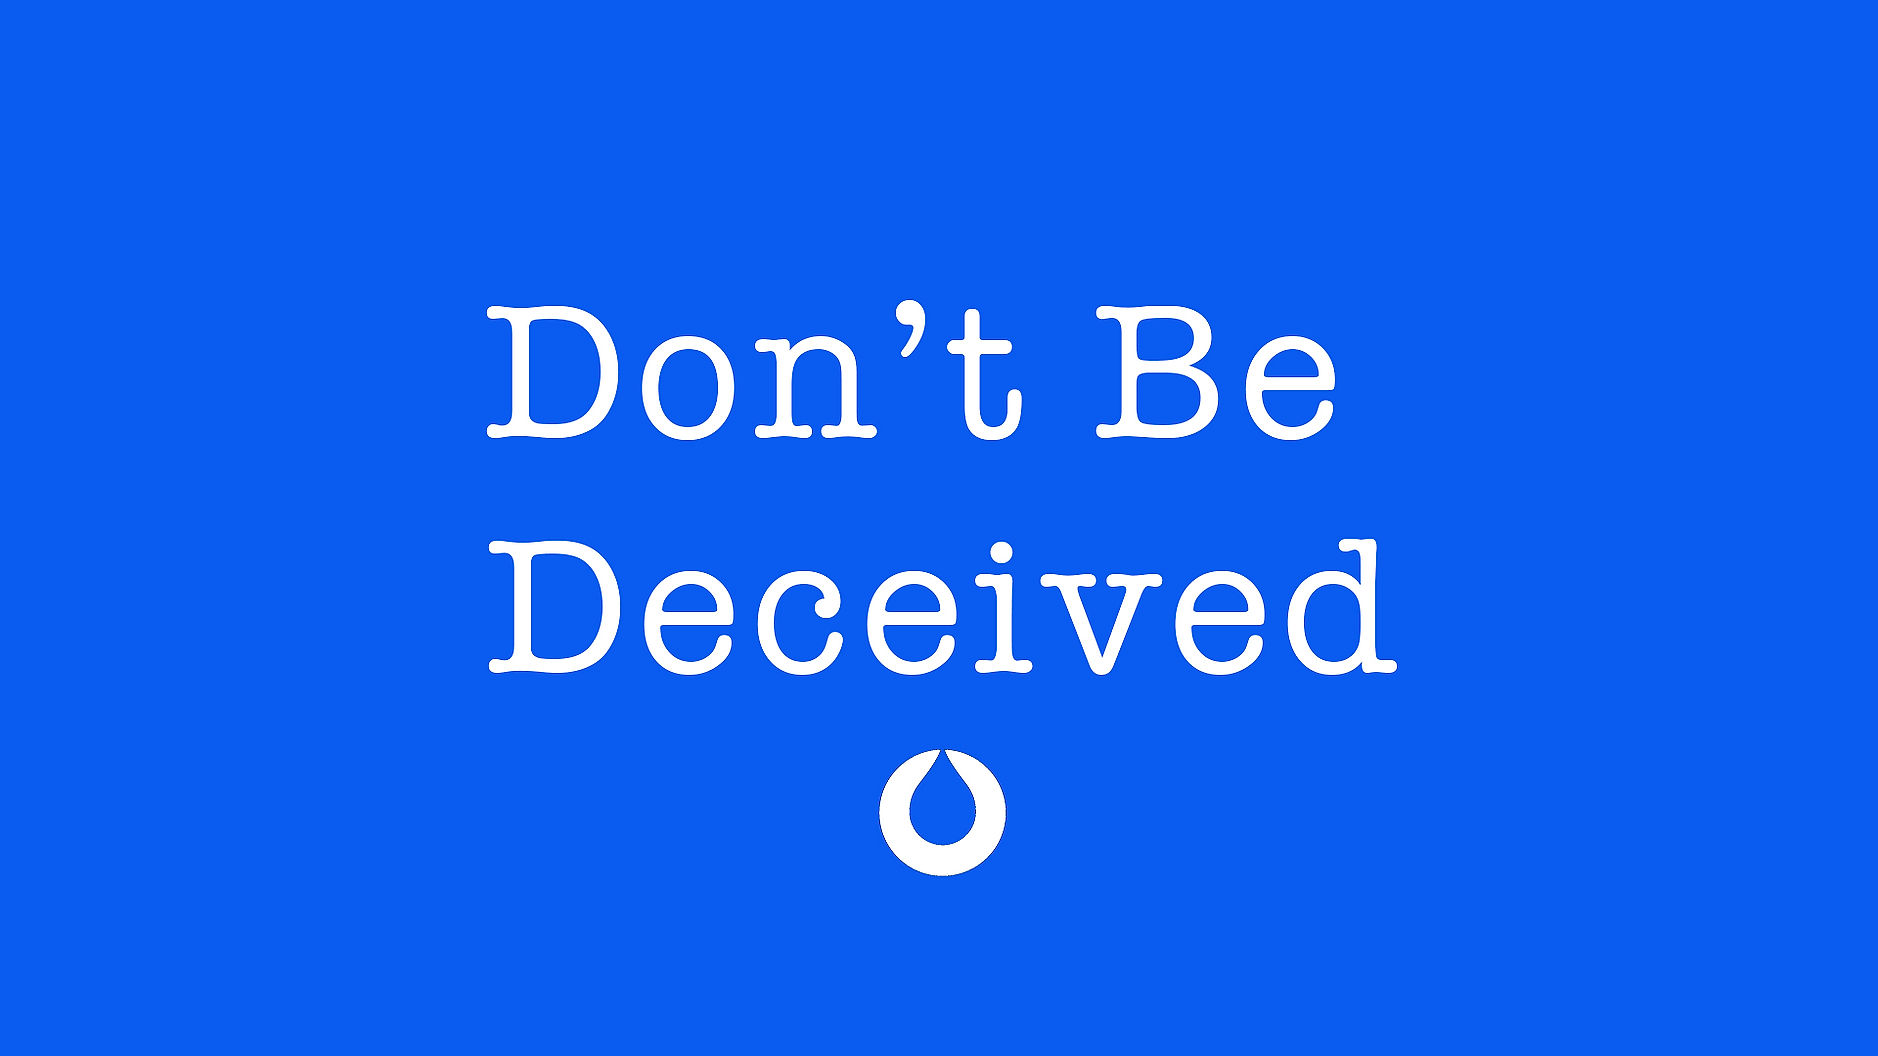 DON'T BE DECEIVED